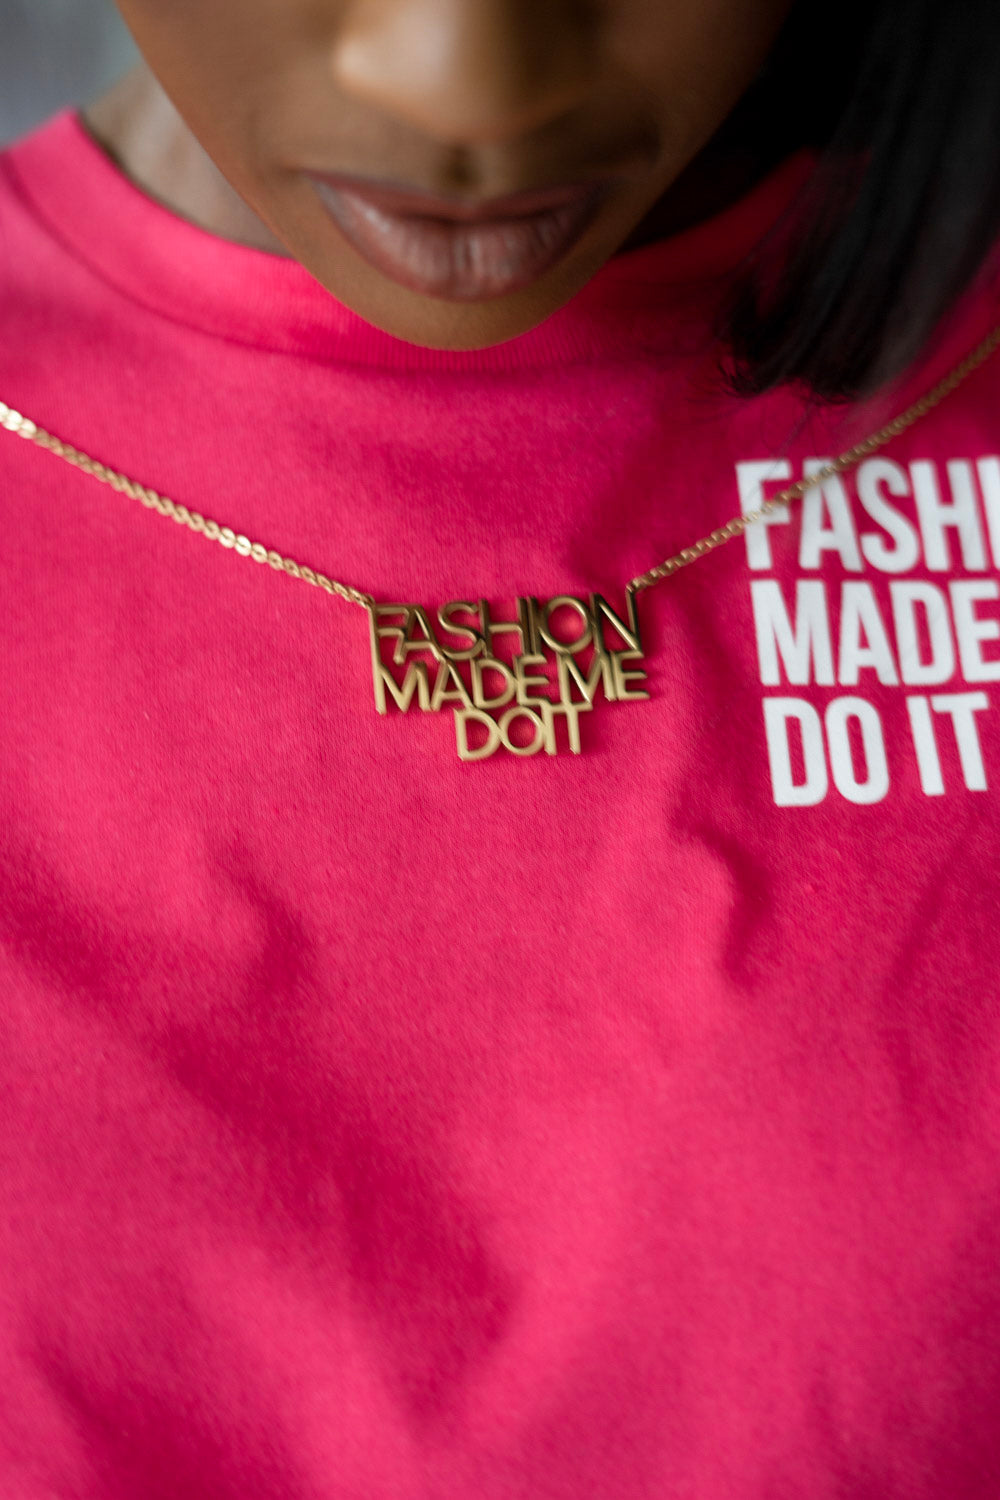 Fashion Made Me Do It Necklace